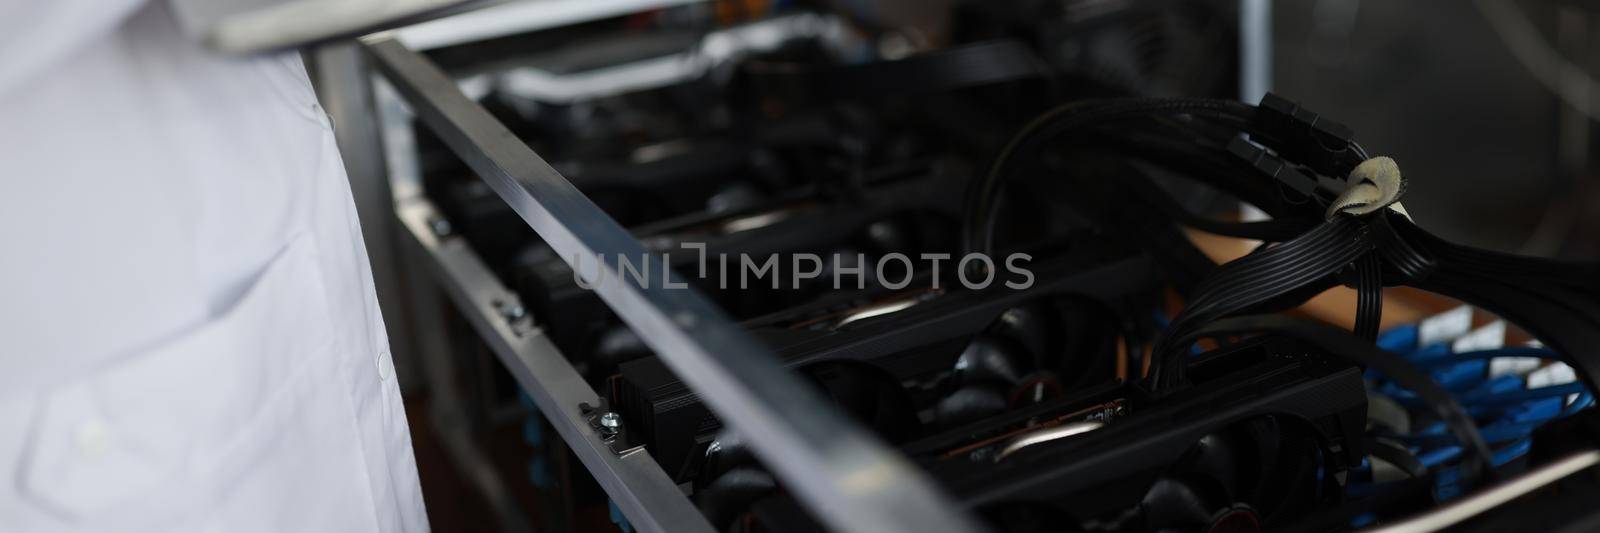 Close-up of technician miner with laptop research mining farm work. Equipment for mining cryptocurrency. Station for extraction of digital cryptocurrencies such as bitcoin, ethereum or altcoins